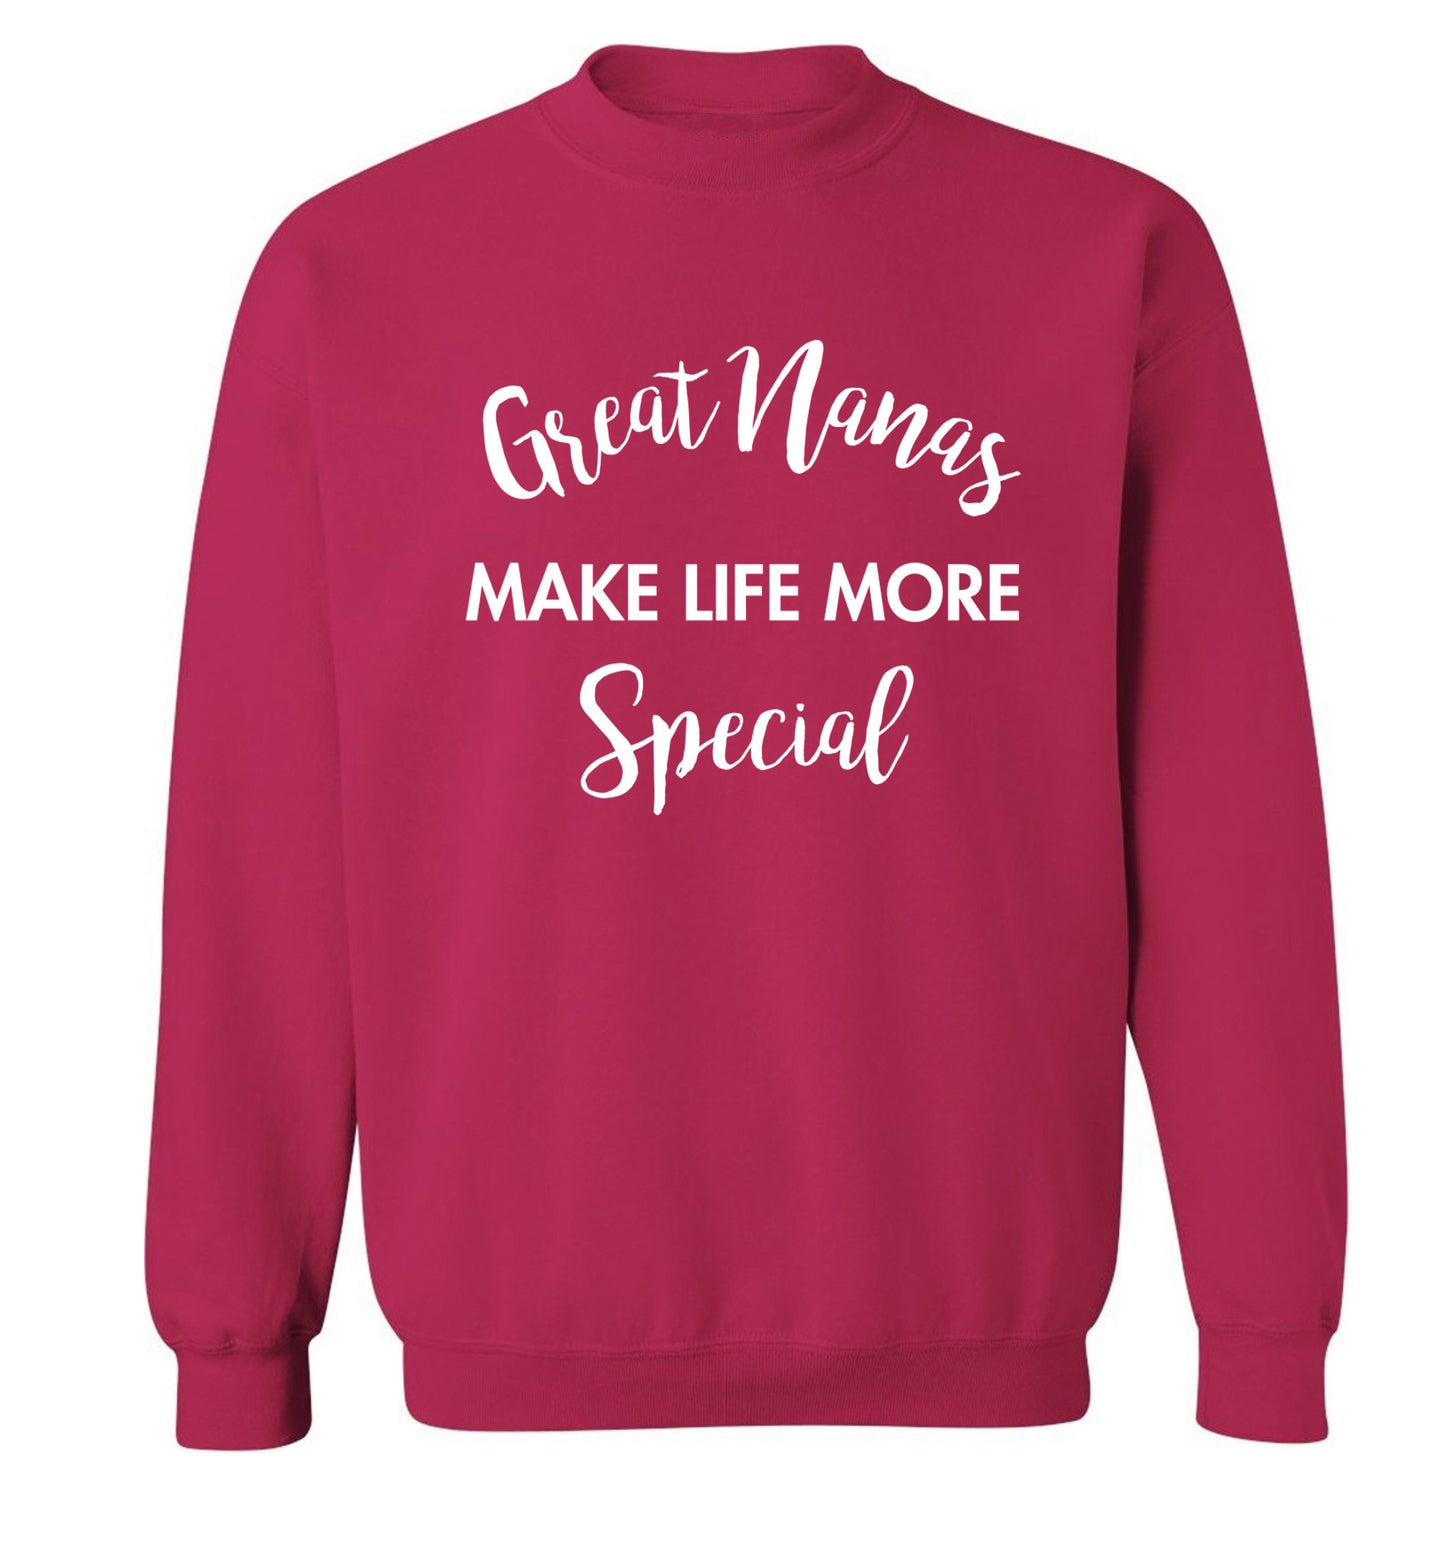 Great nanas make life more special Adult's unisex pink Sweater 2XL